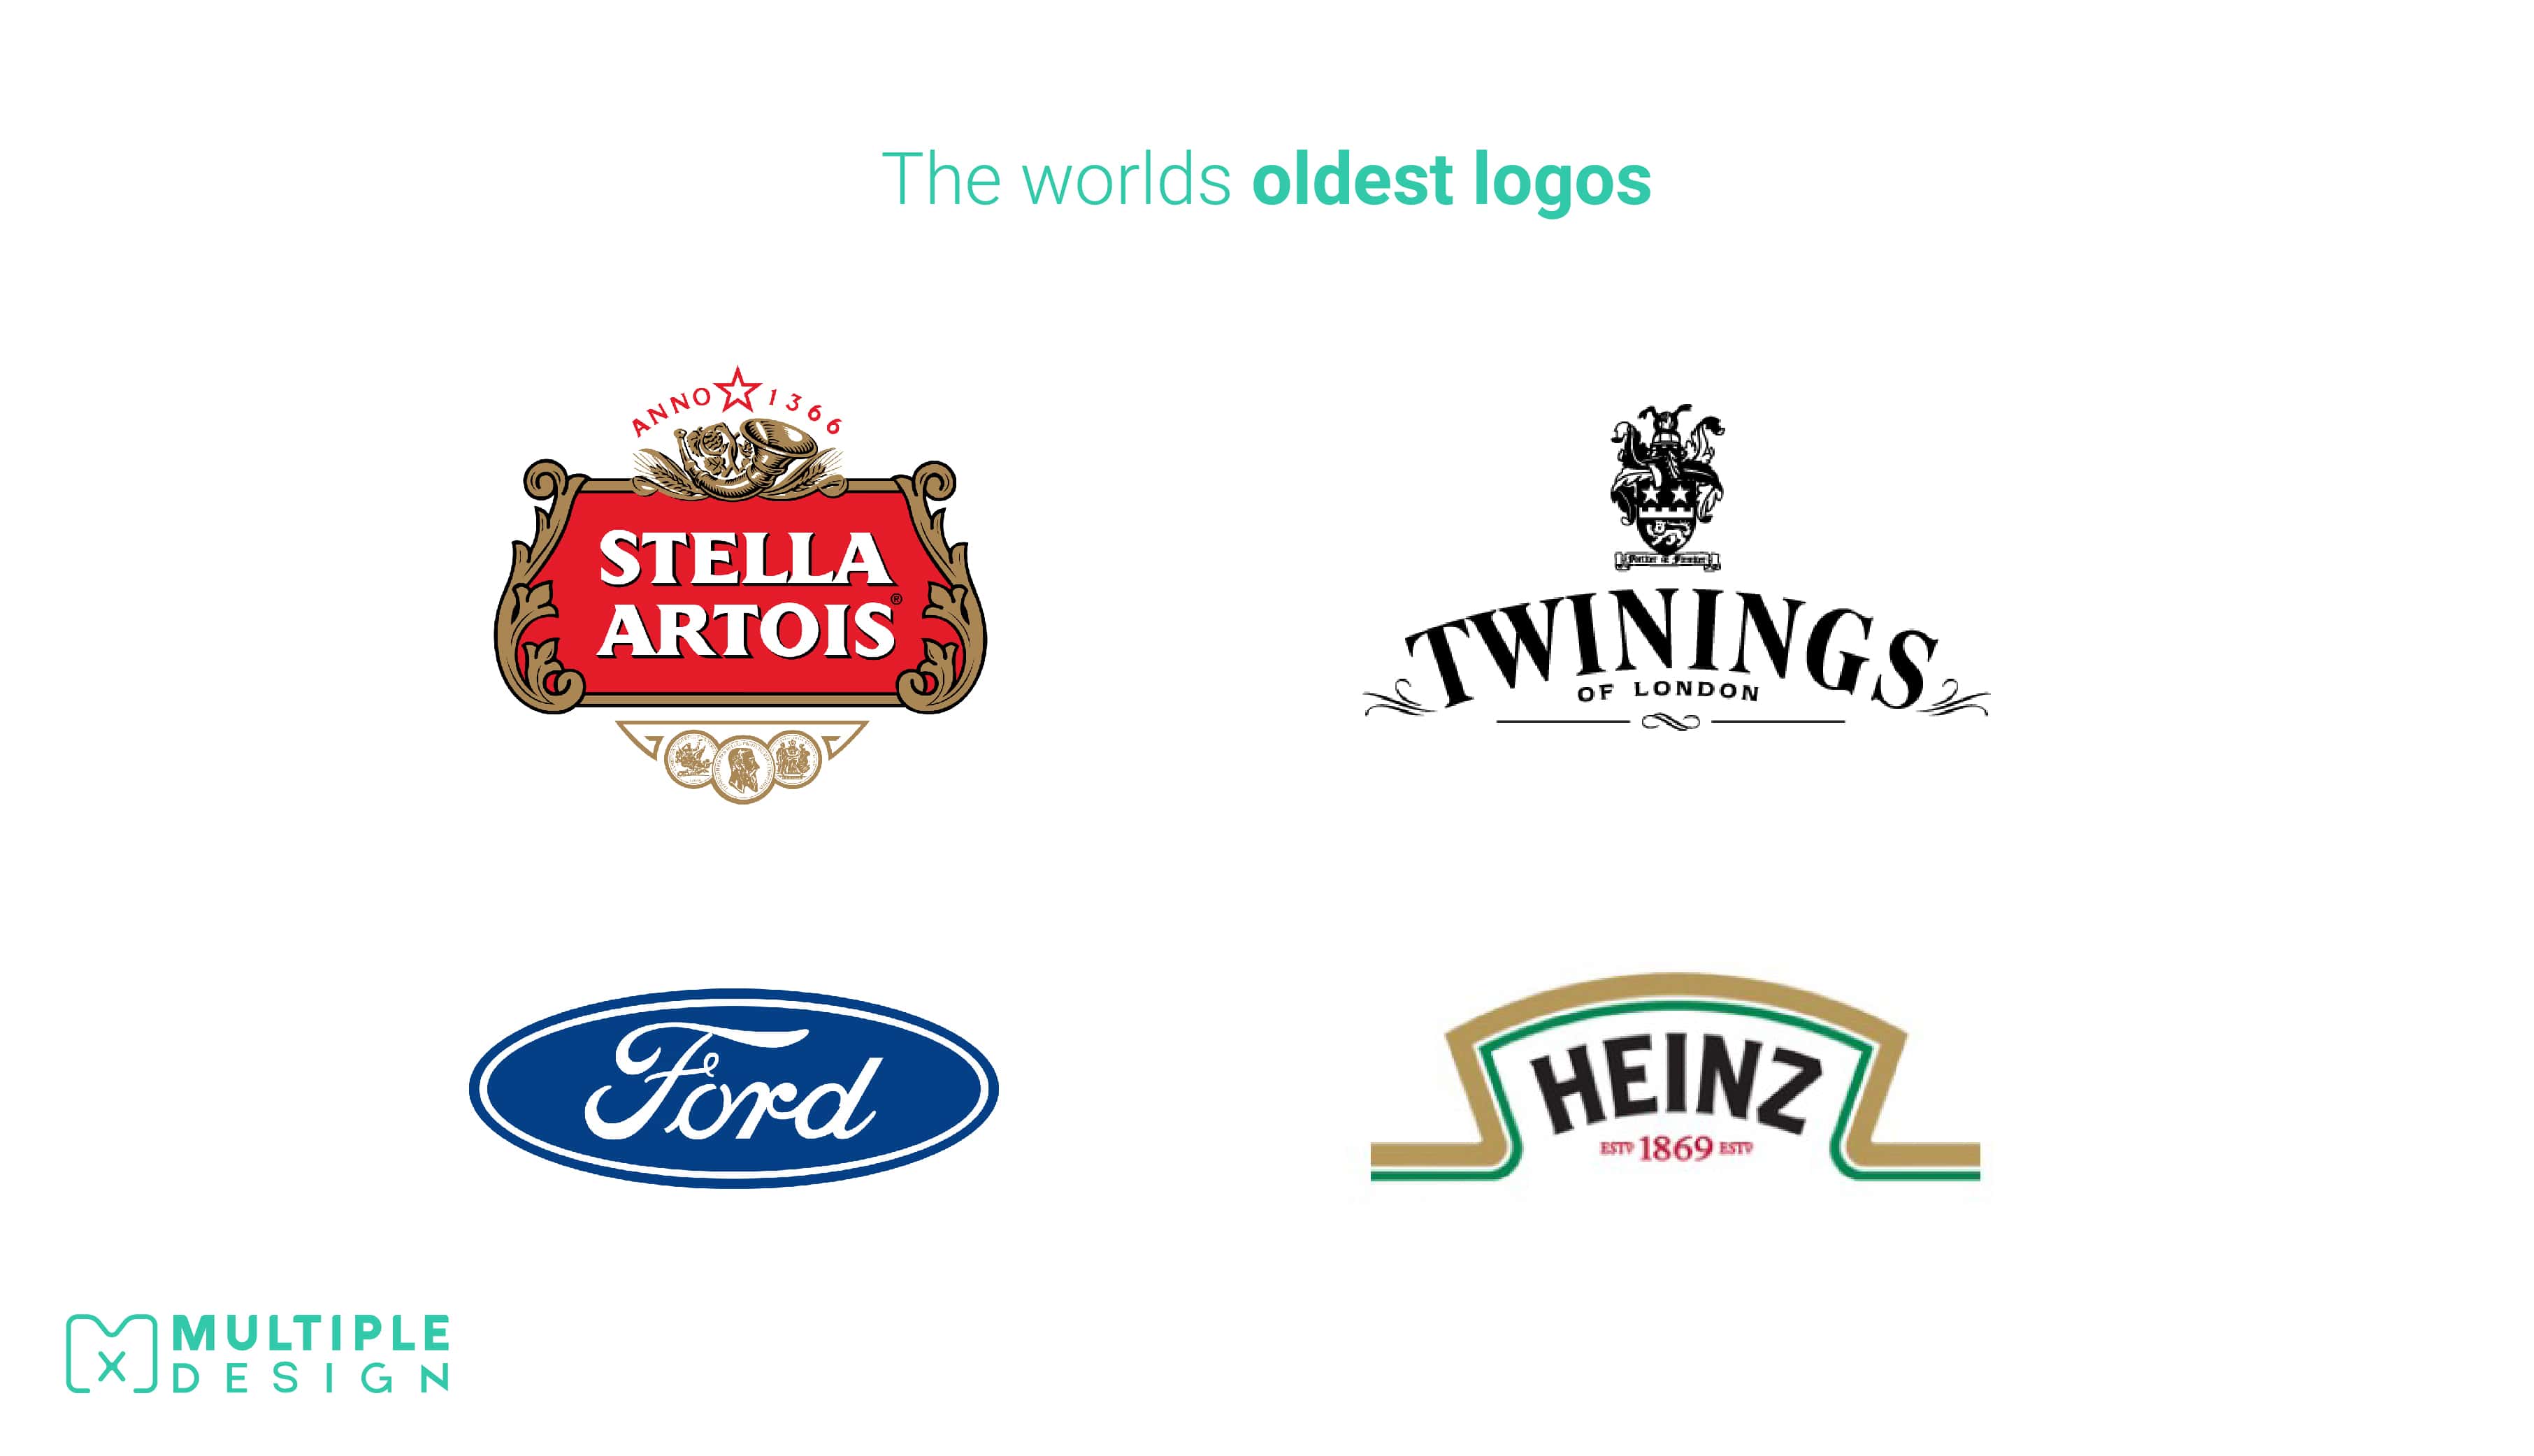 The worlds oldest logos